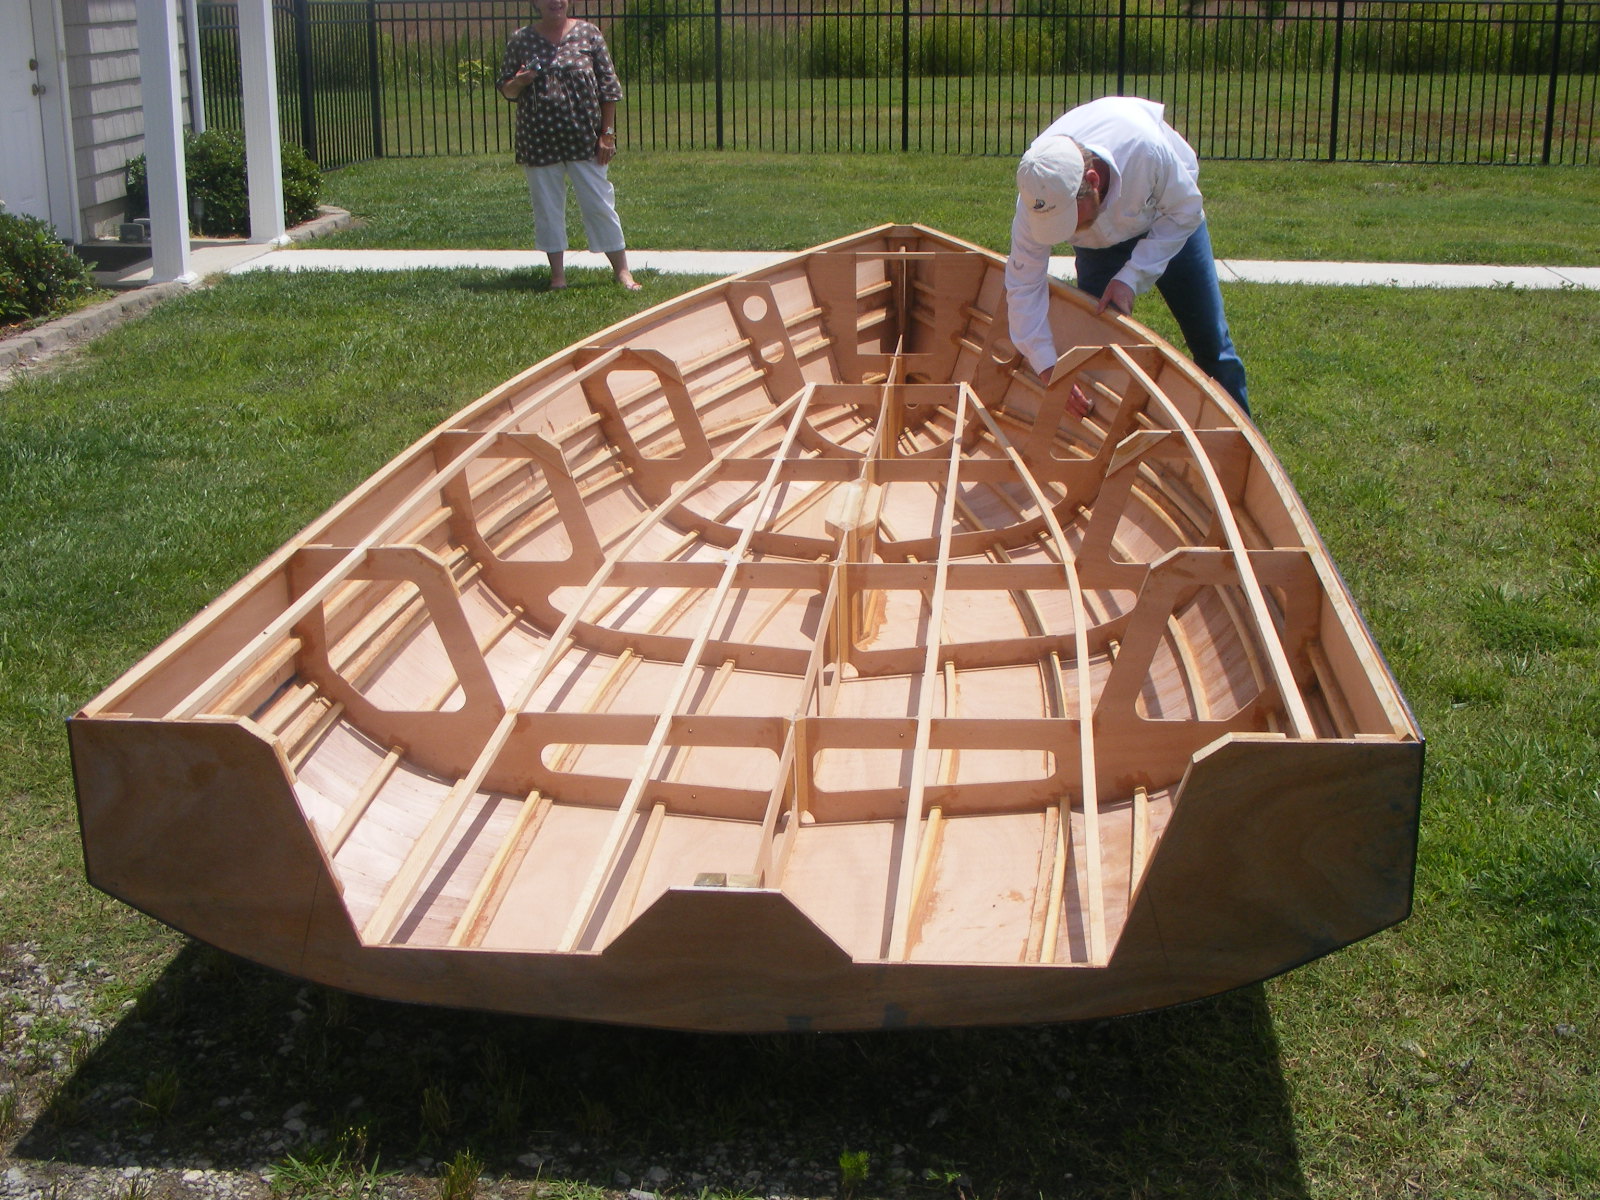 Dudley Dix Yacht Design: Plywood Boat Kits